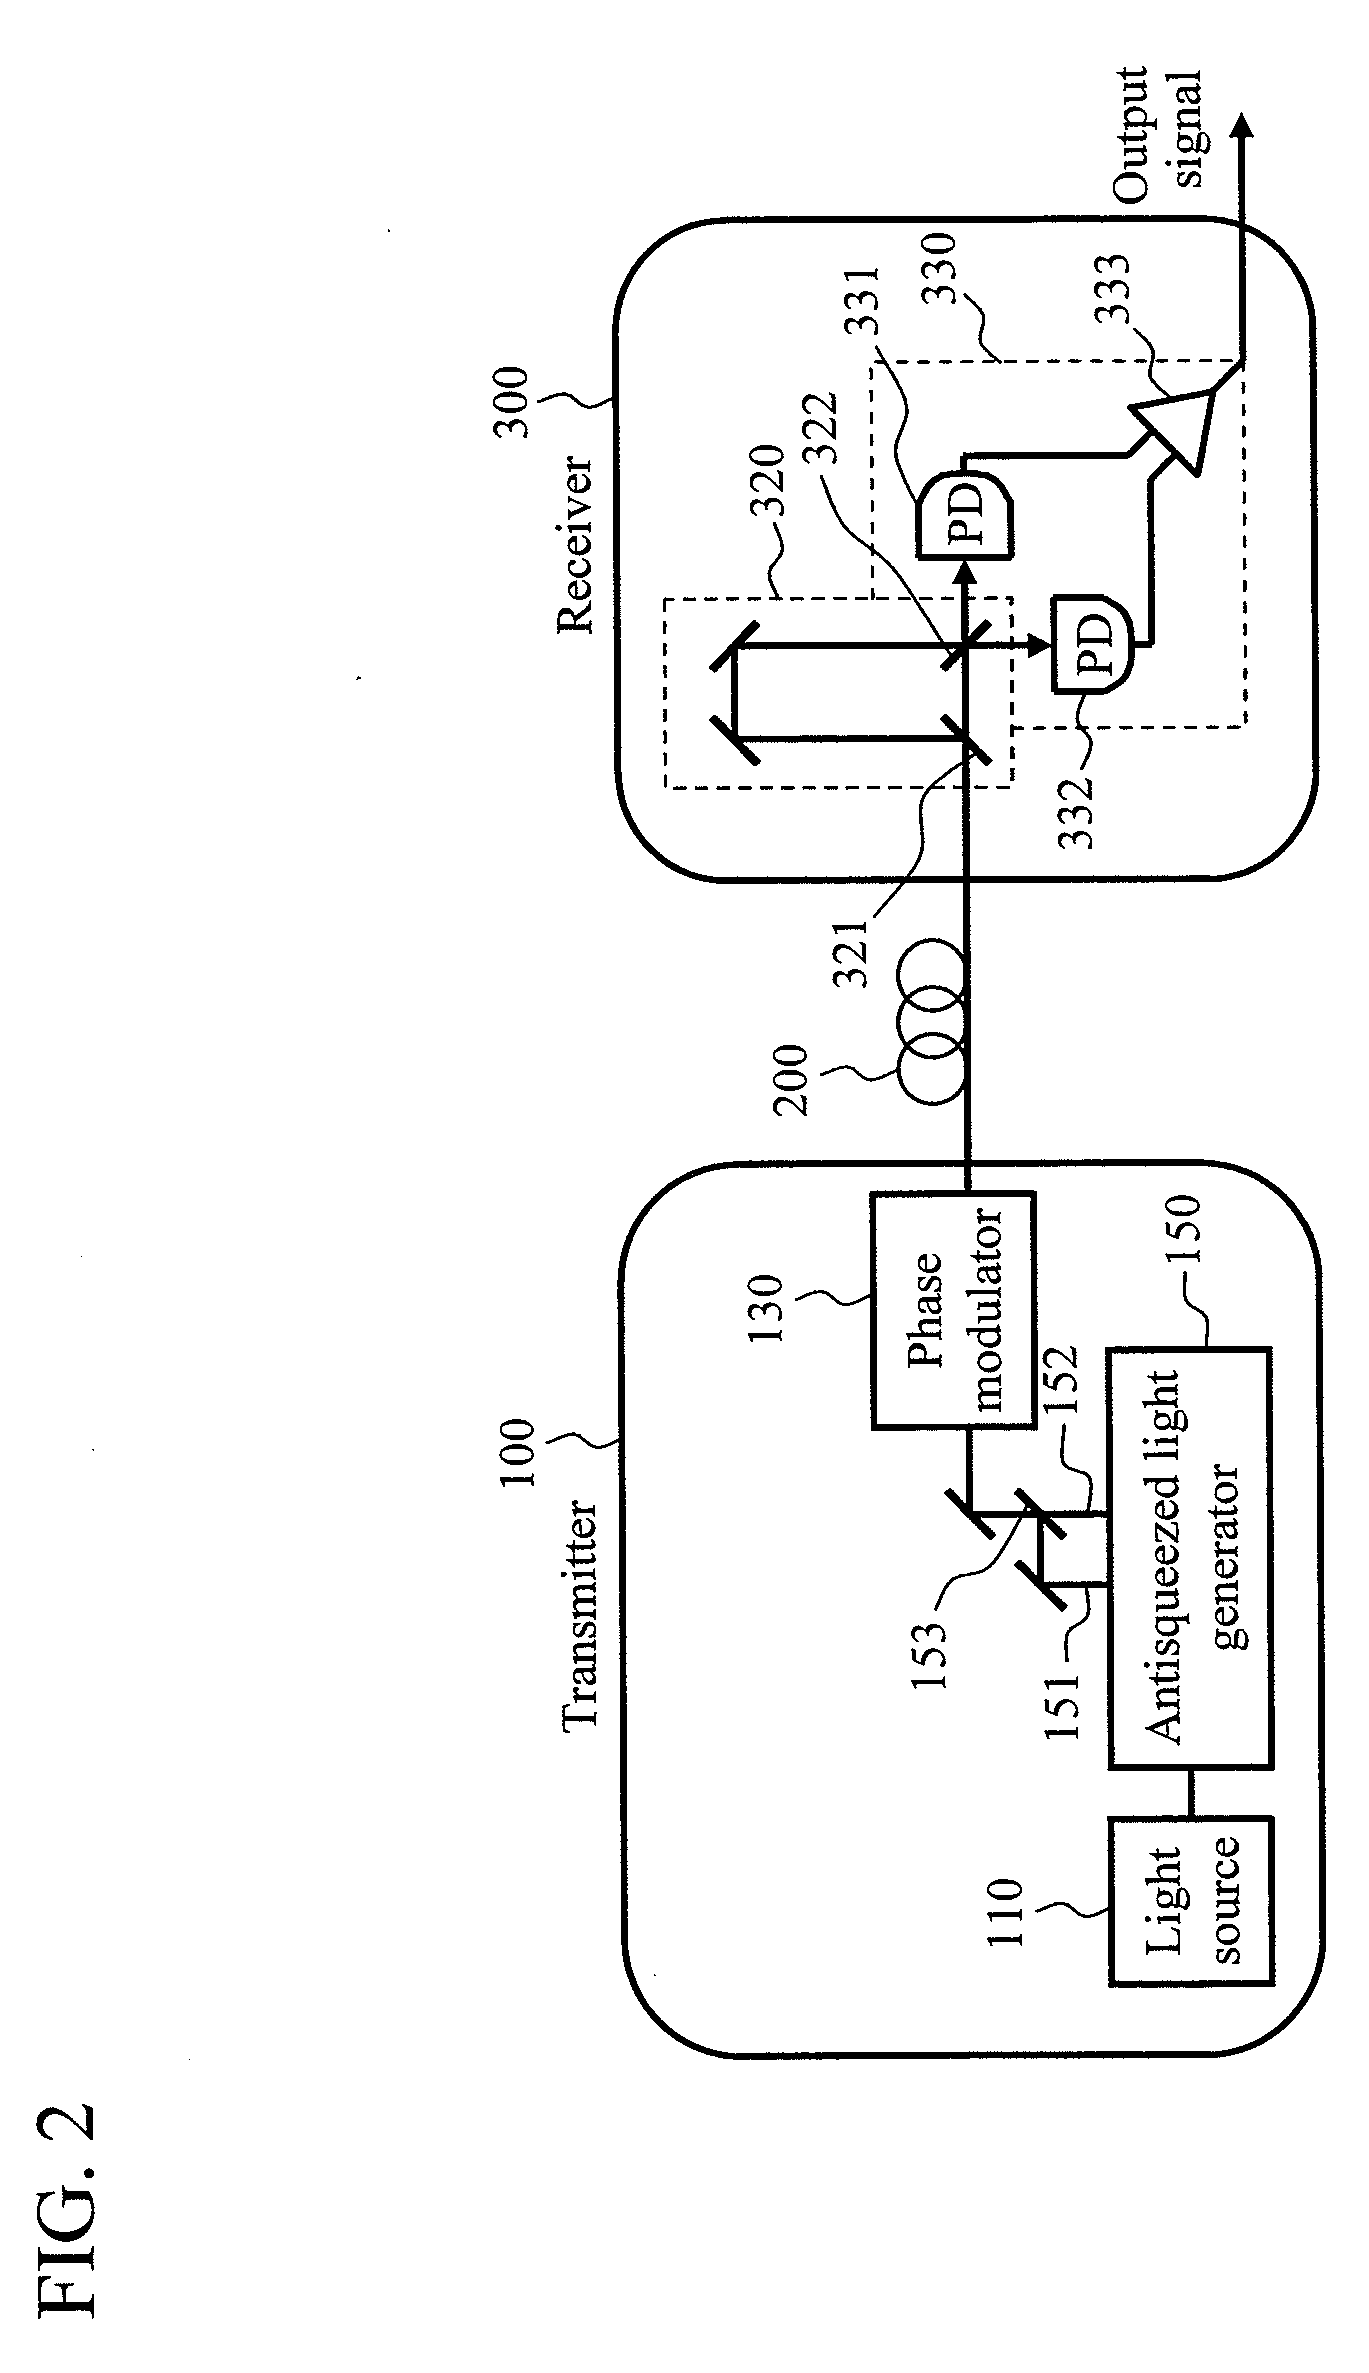 Optical transmitting and receiving system